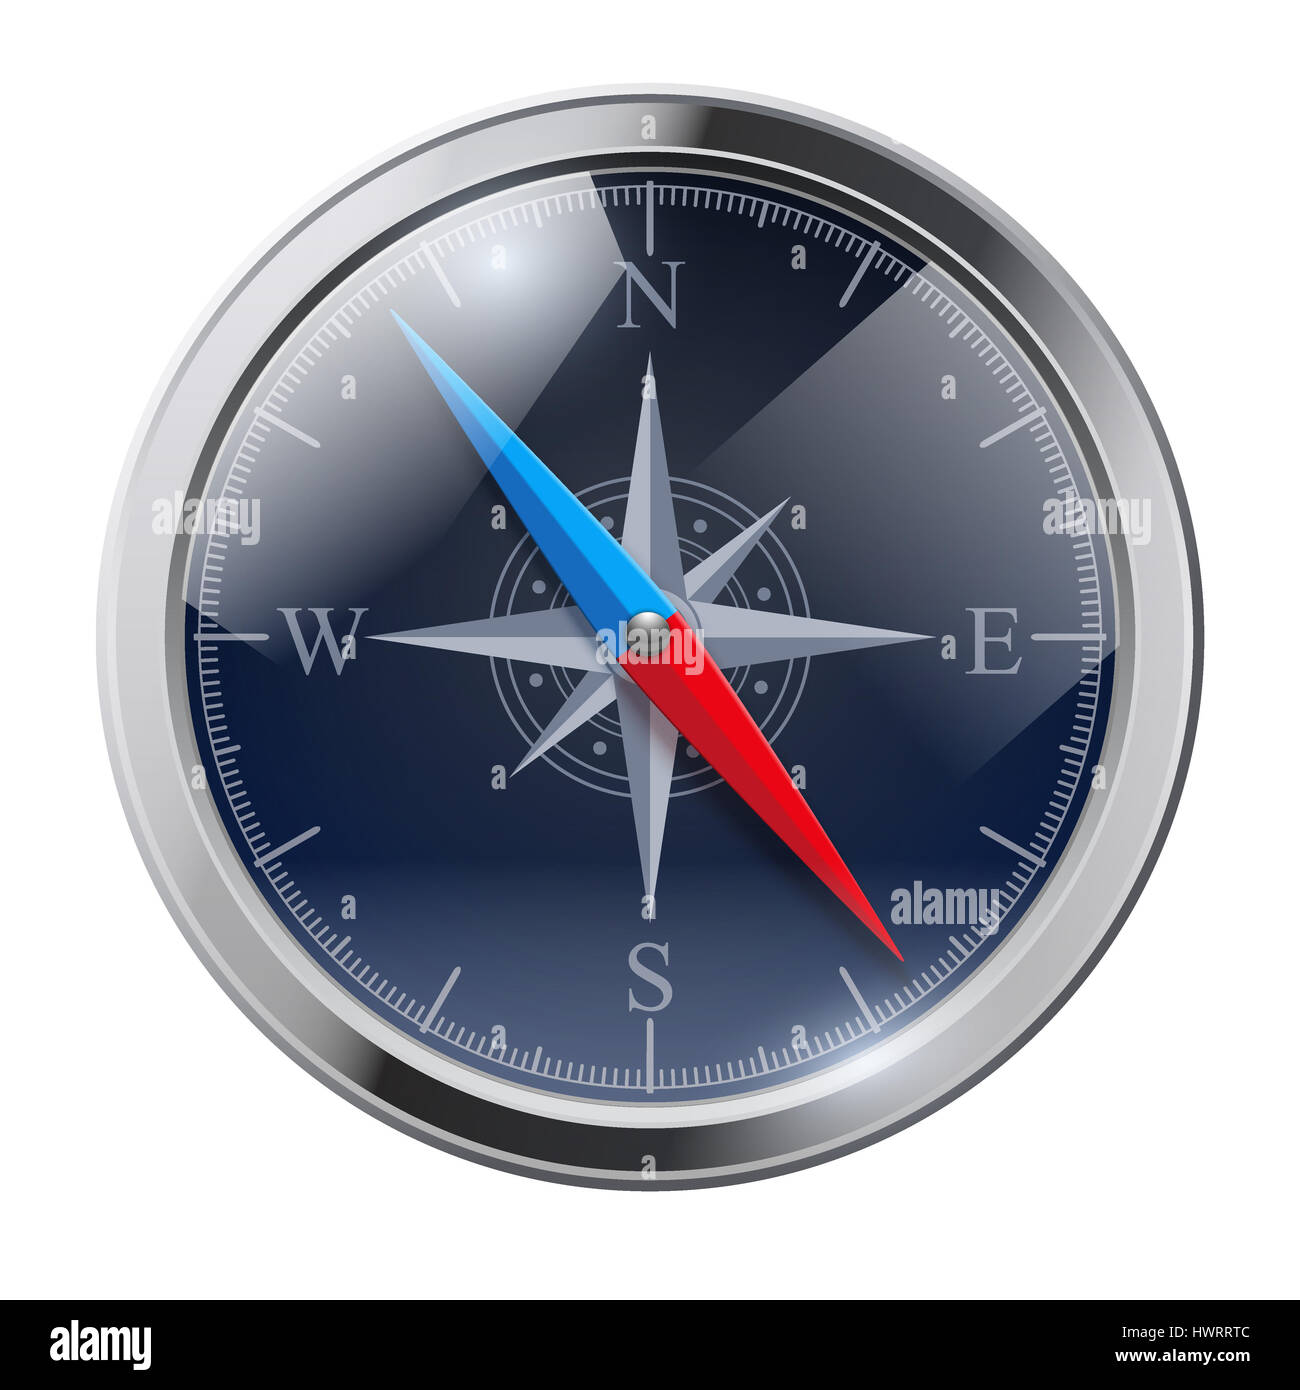 Glossy Bright Vintage Compass analog display in a metal case with wind rose. Time Illustration. Stock Photo